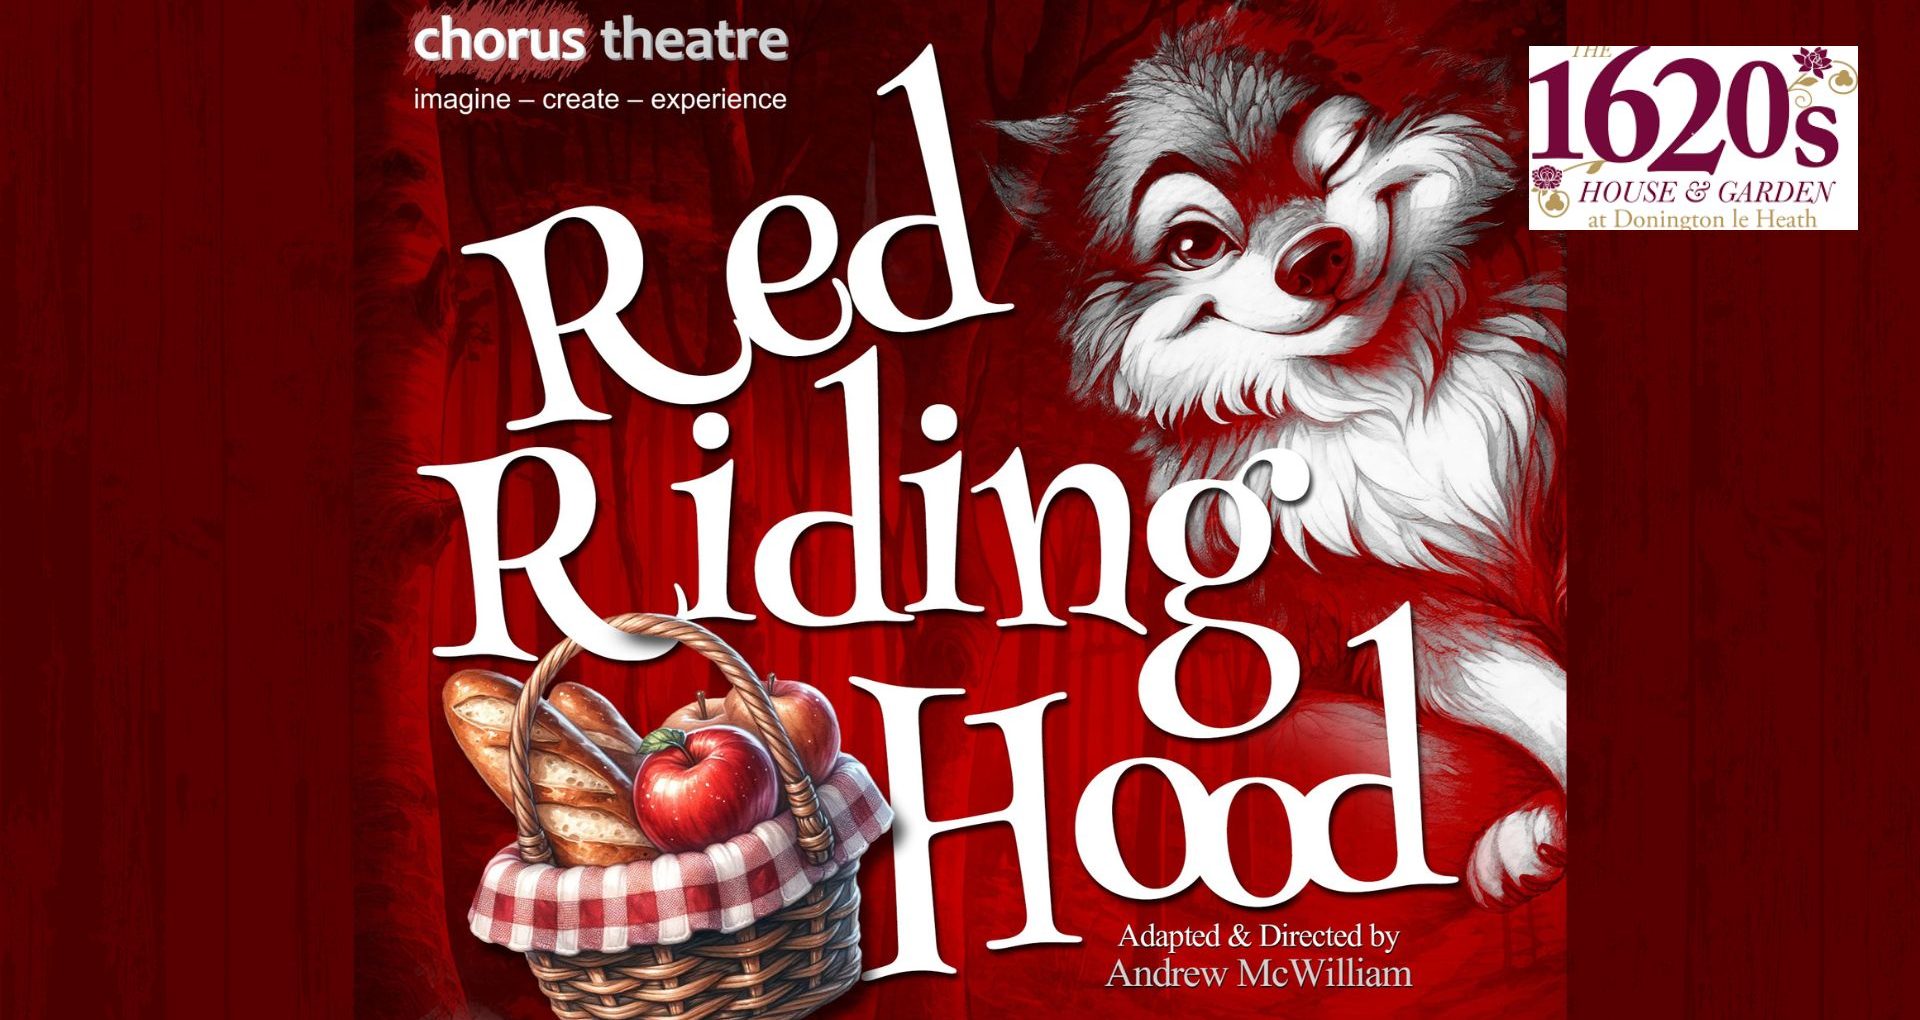 Chorus Theatre Presents: Red Riding Hood - Outdoor Theatre